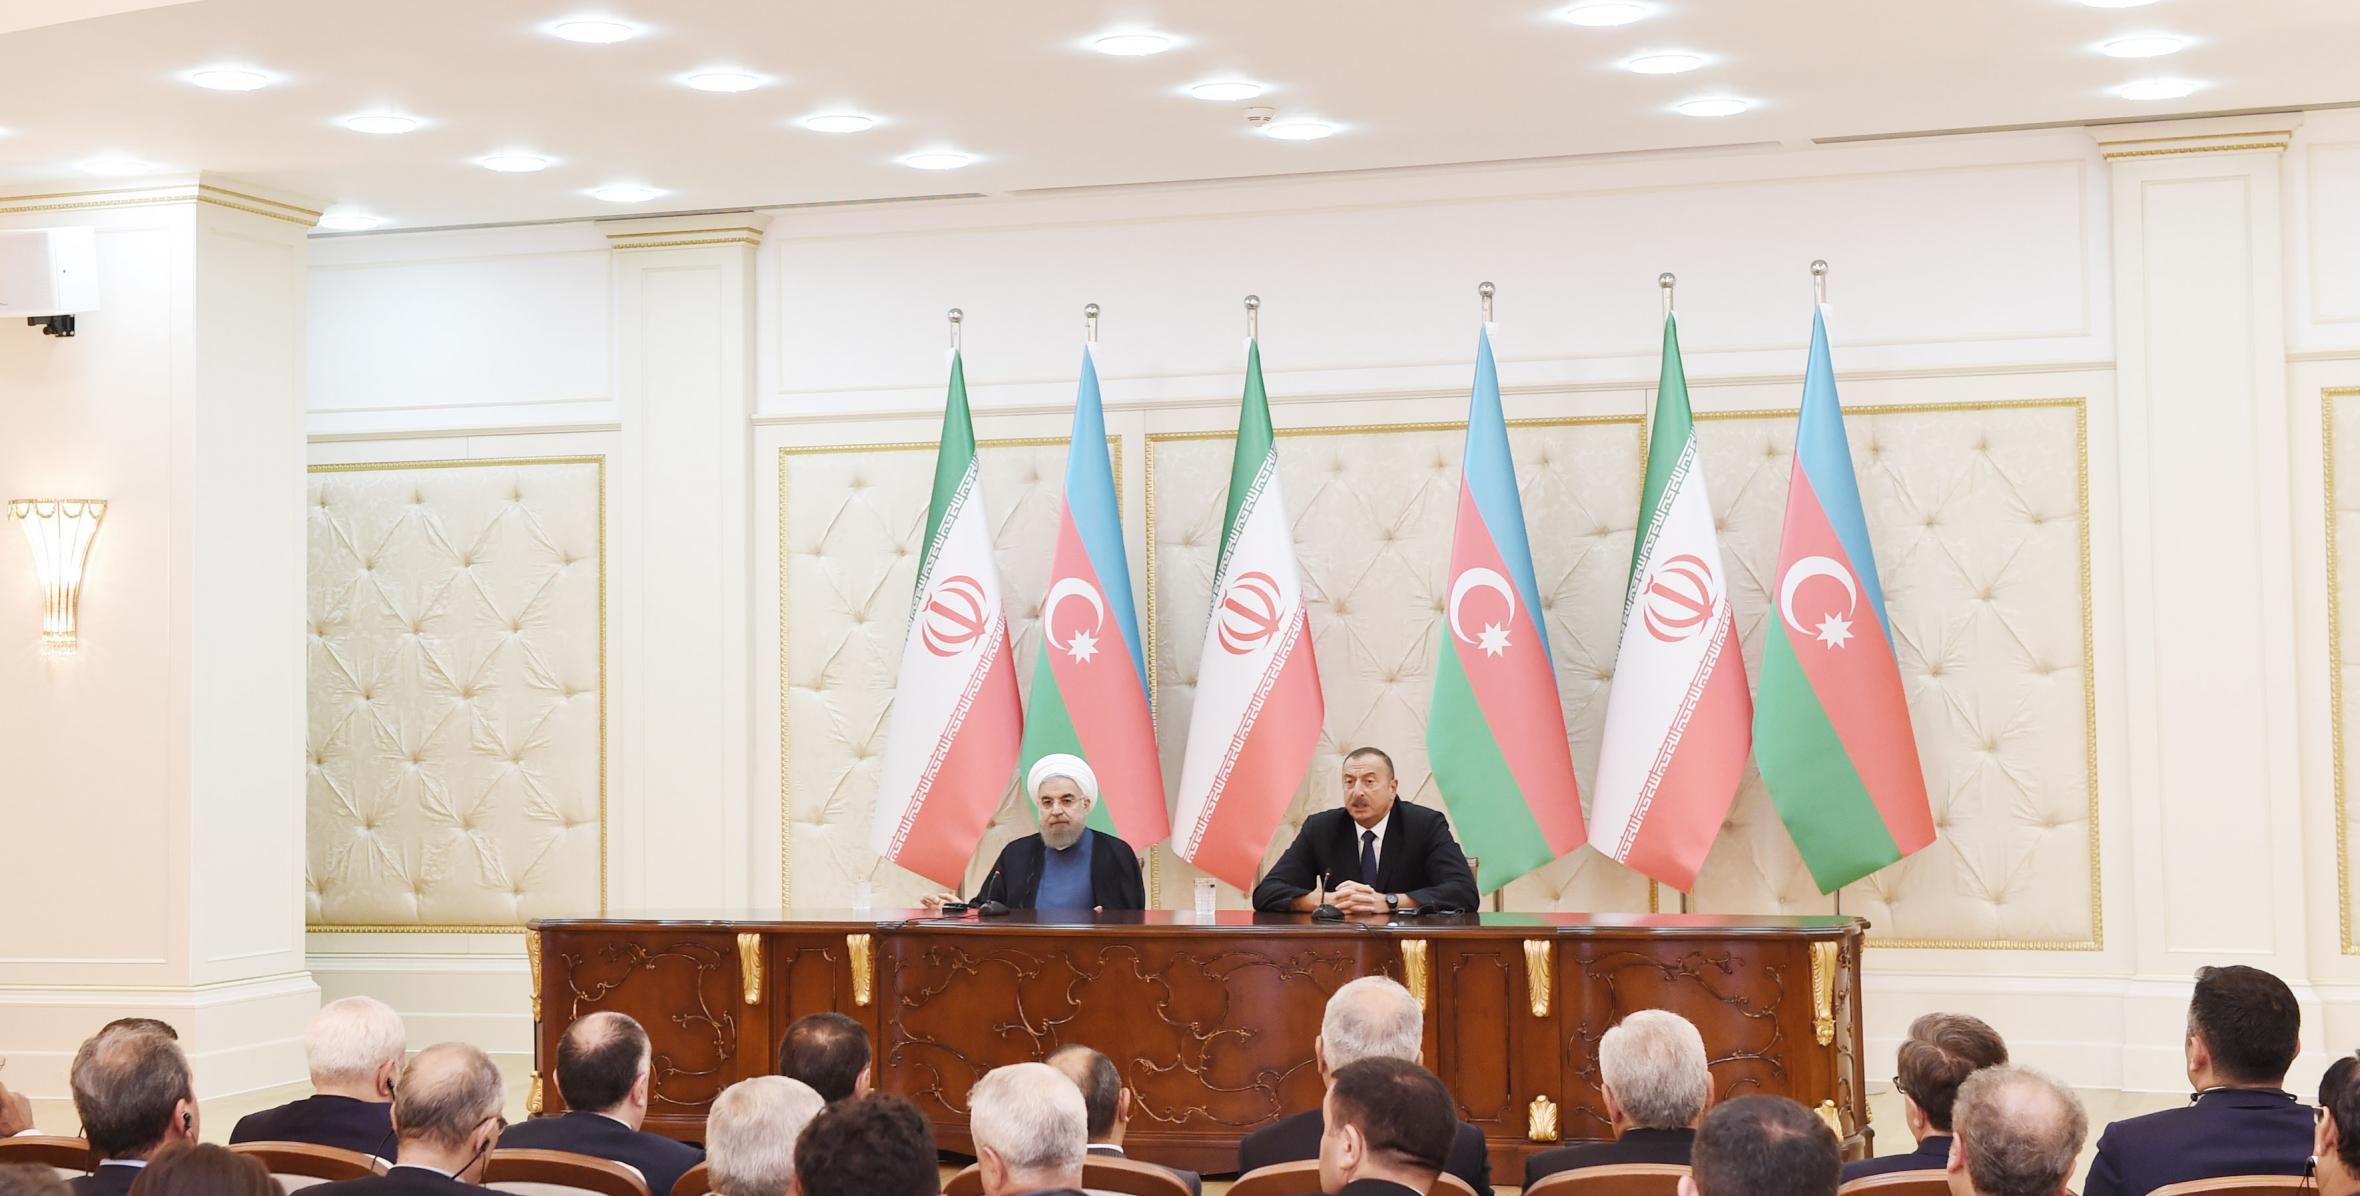 Azerbaijani and Iranian presidents made statements for the press